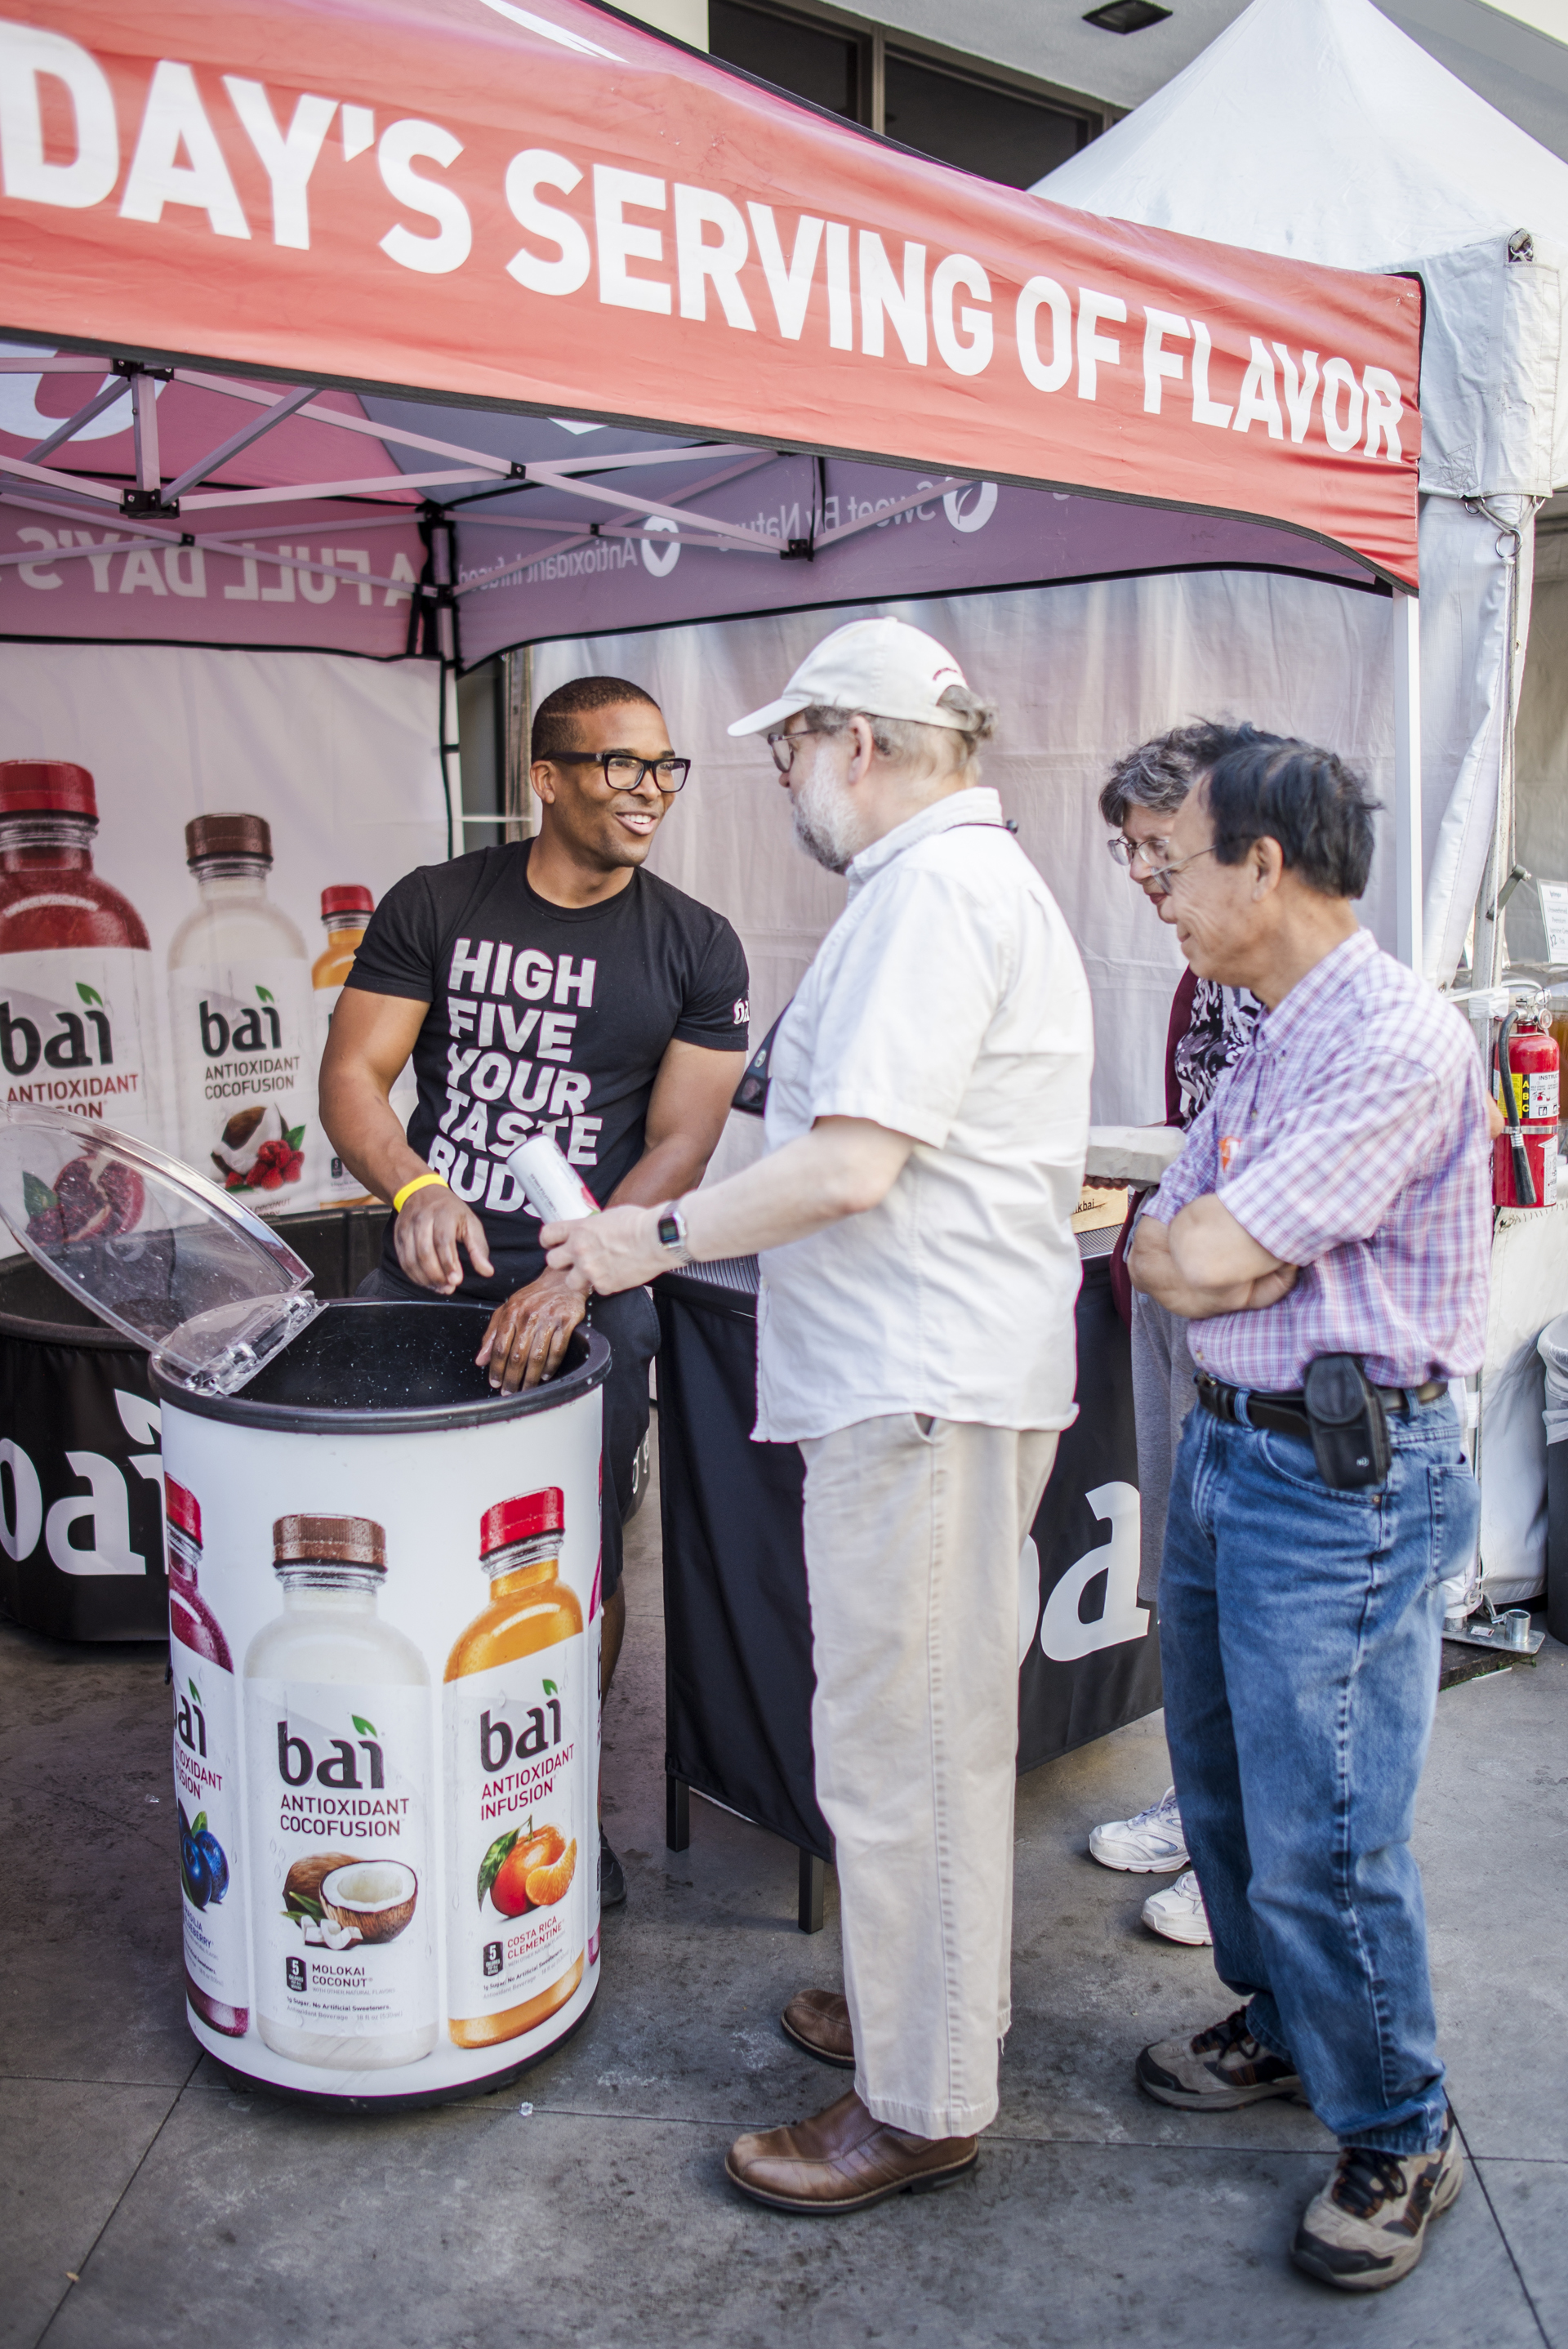  Bai was also present promoting their flavored fizzy water product. 